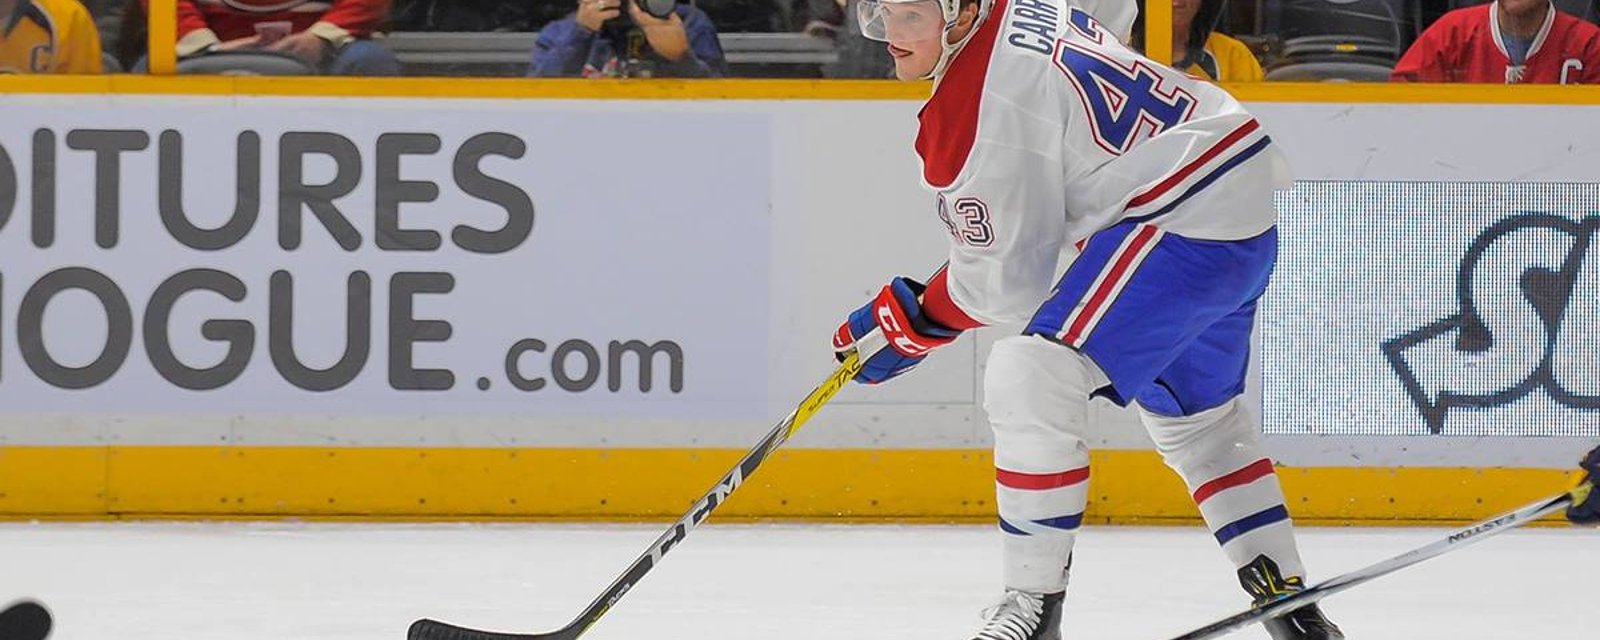 Two key forwards clear waivers and will report to the Laval Rocket